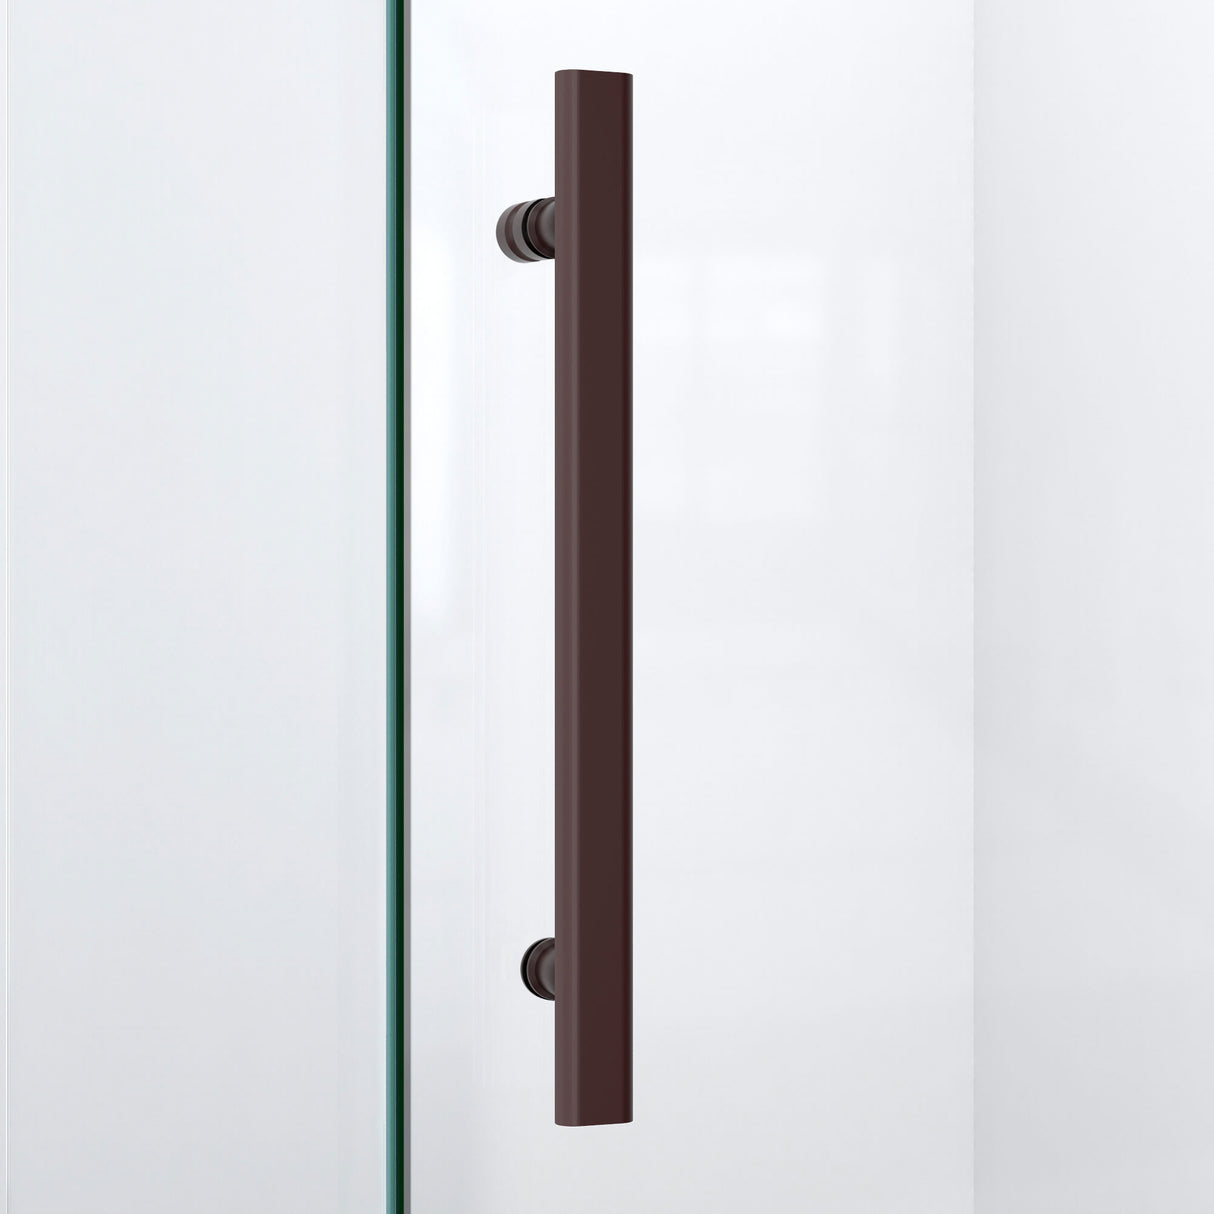 DreamLine Quatra Plus 32 in. D x 46 in. W x 72 in. H Frameless Hinged Shower Enclosure in Oil Rubbed Bronze